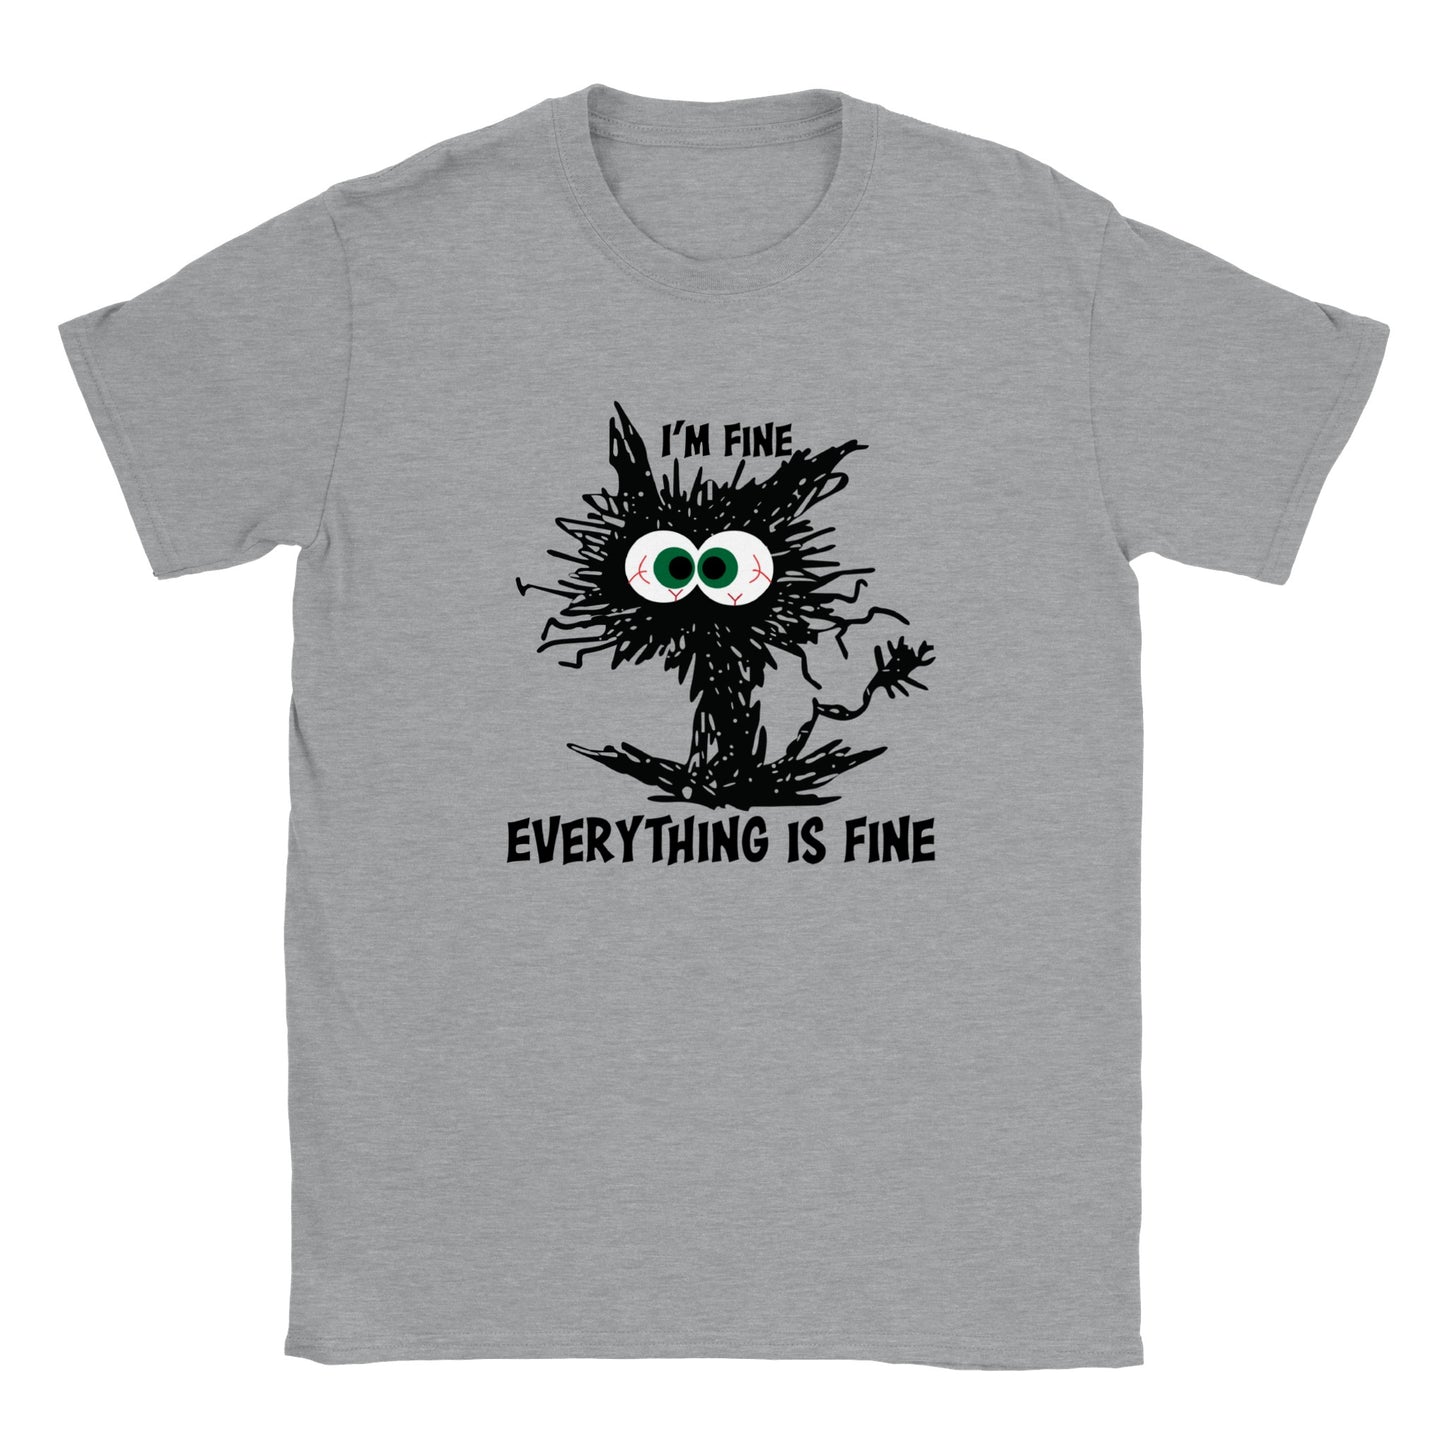 I'm Fine, Everything is Fine - Classic Unisex Crewneck T-shirt - Mister Snarky's